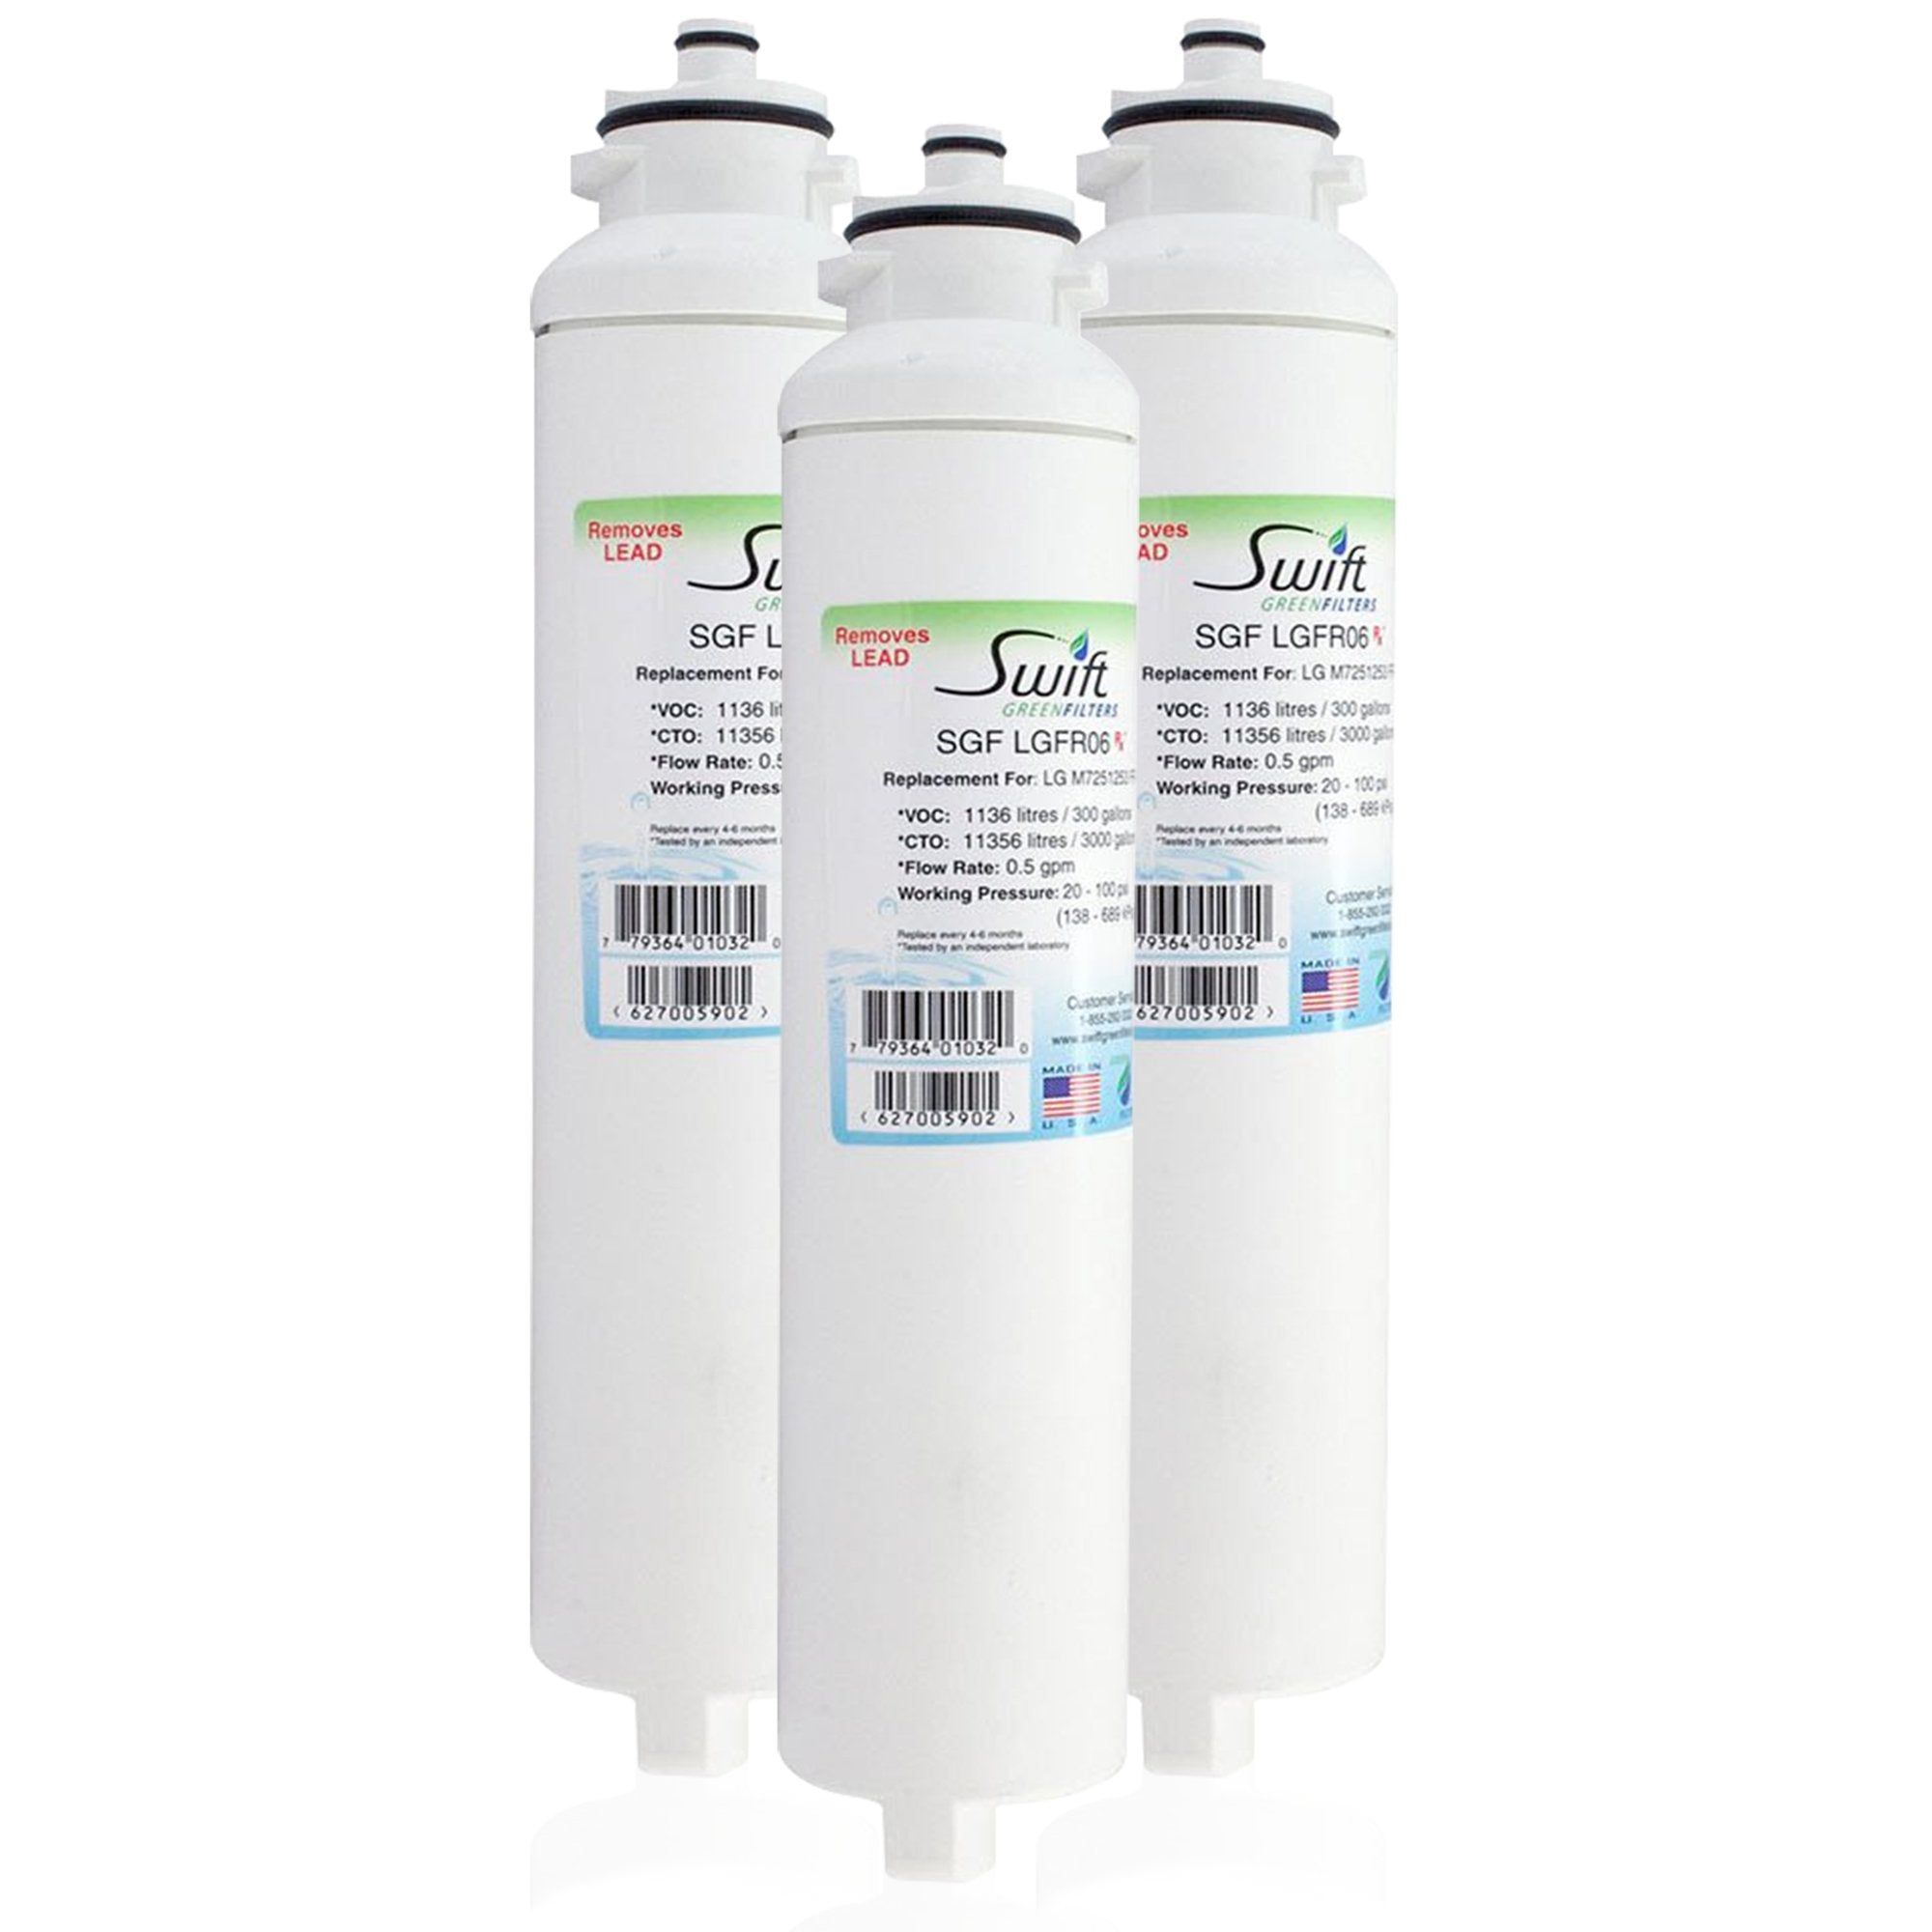 LG M7251242FR-06, M7251252FR-06 & EcoAqua EFF-6028A Compatible Pharmaceutical Refrigerator Water Filter 3 pack